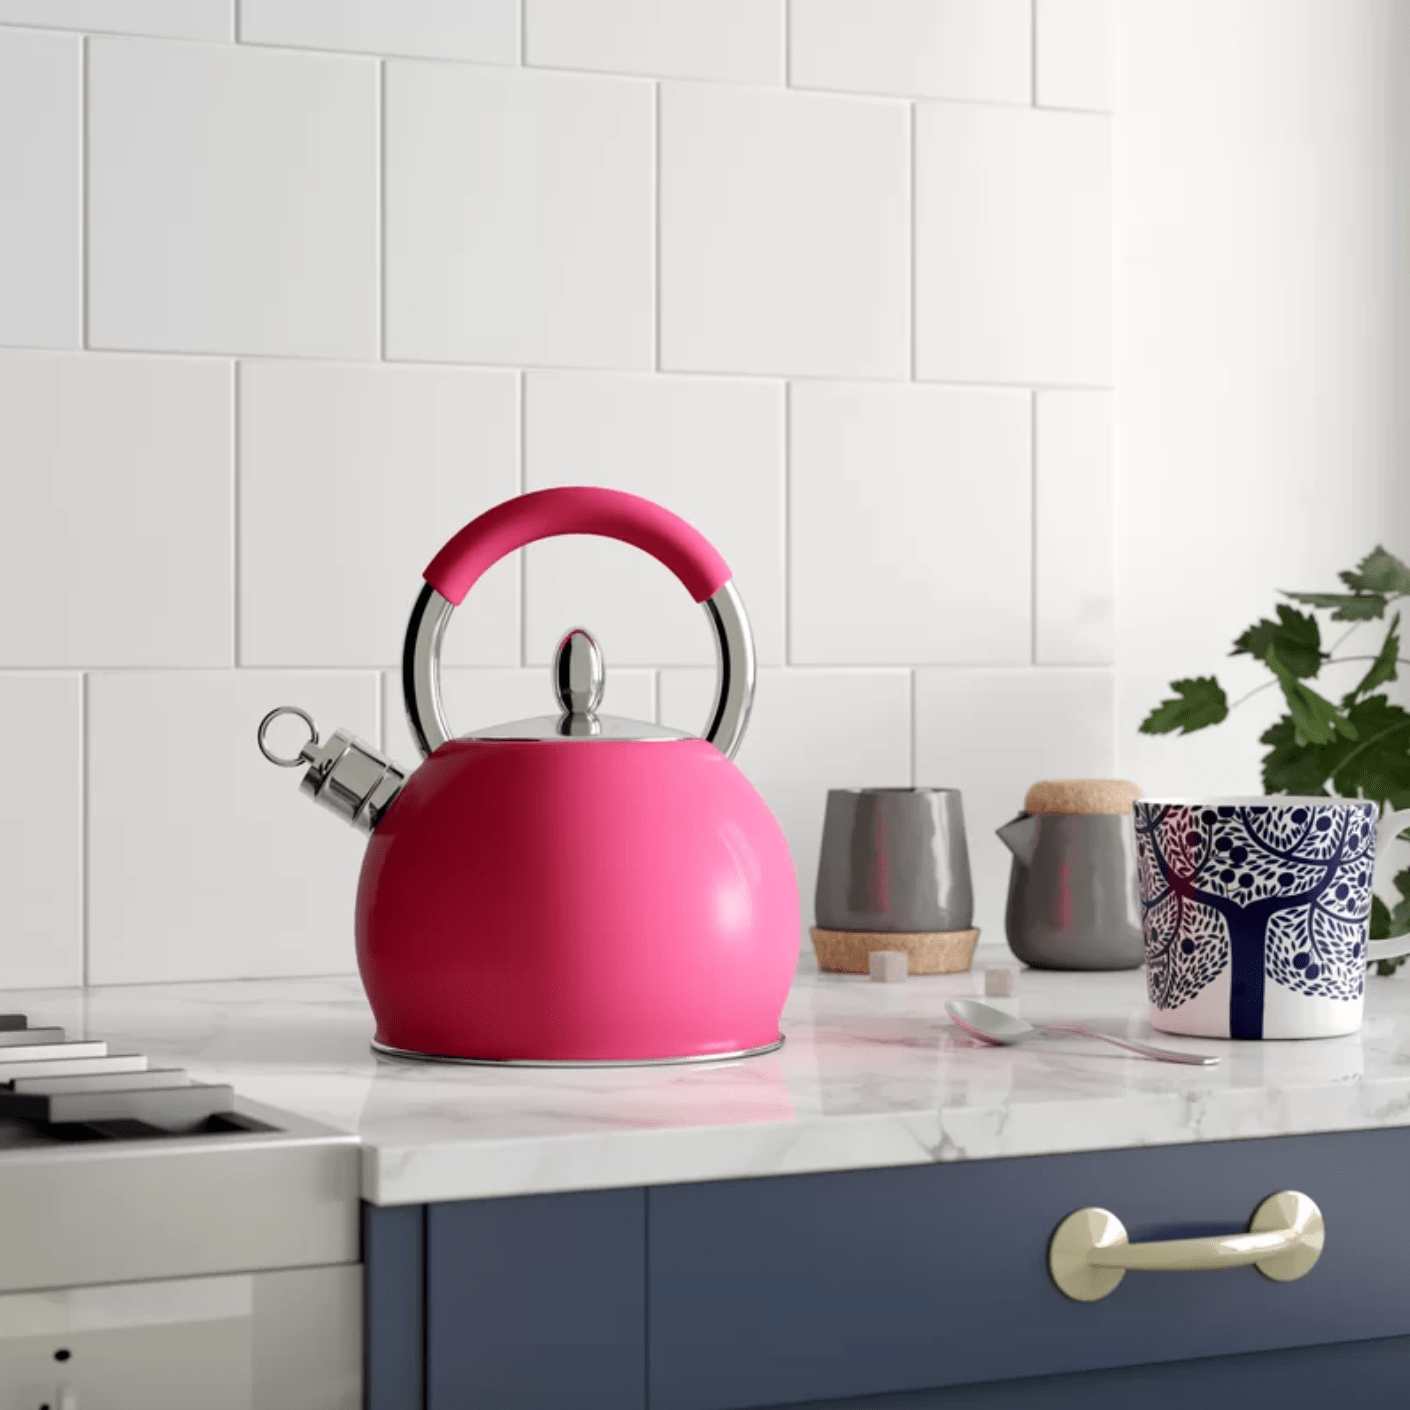 Pink Kettle As a Chic Accent